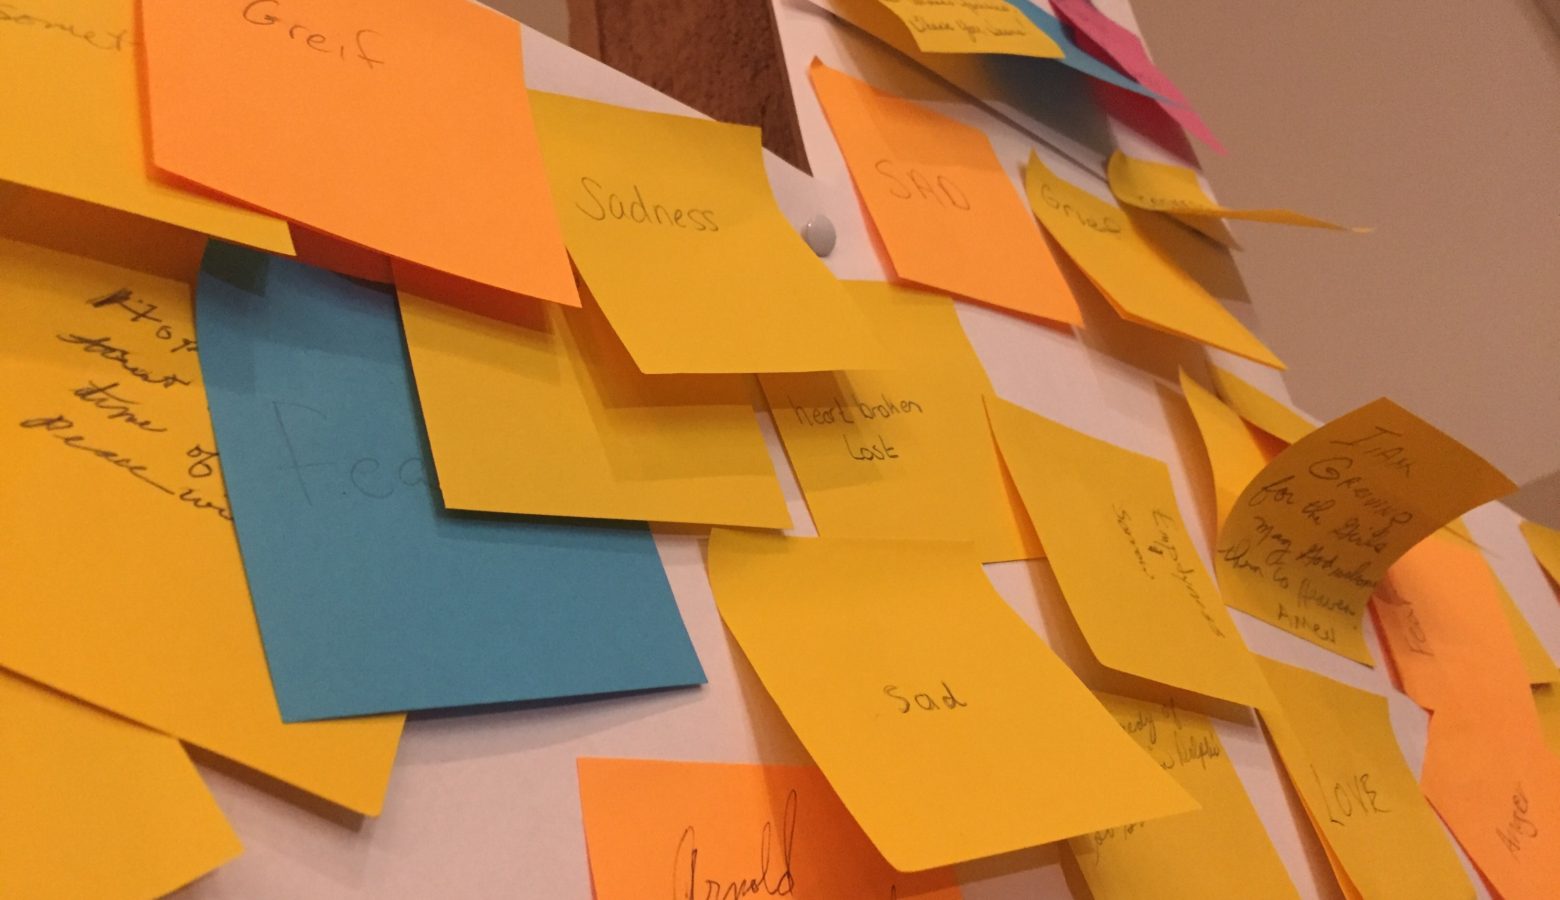 Post-its at the Delphi United Methodist Church are a testament to a community's grief and disbelief